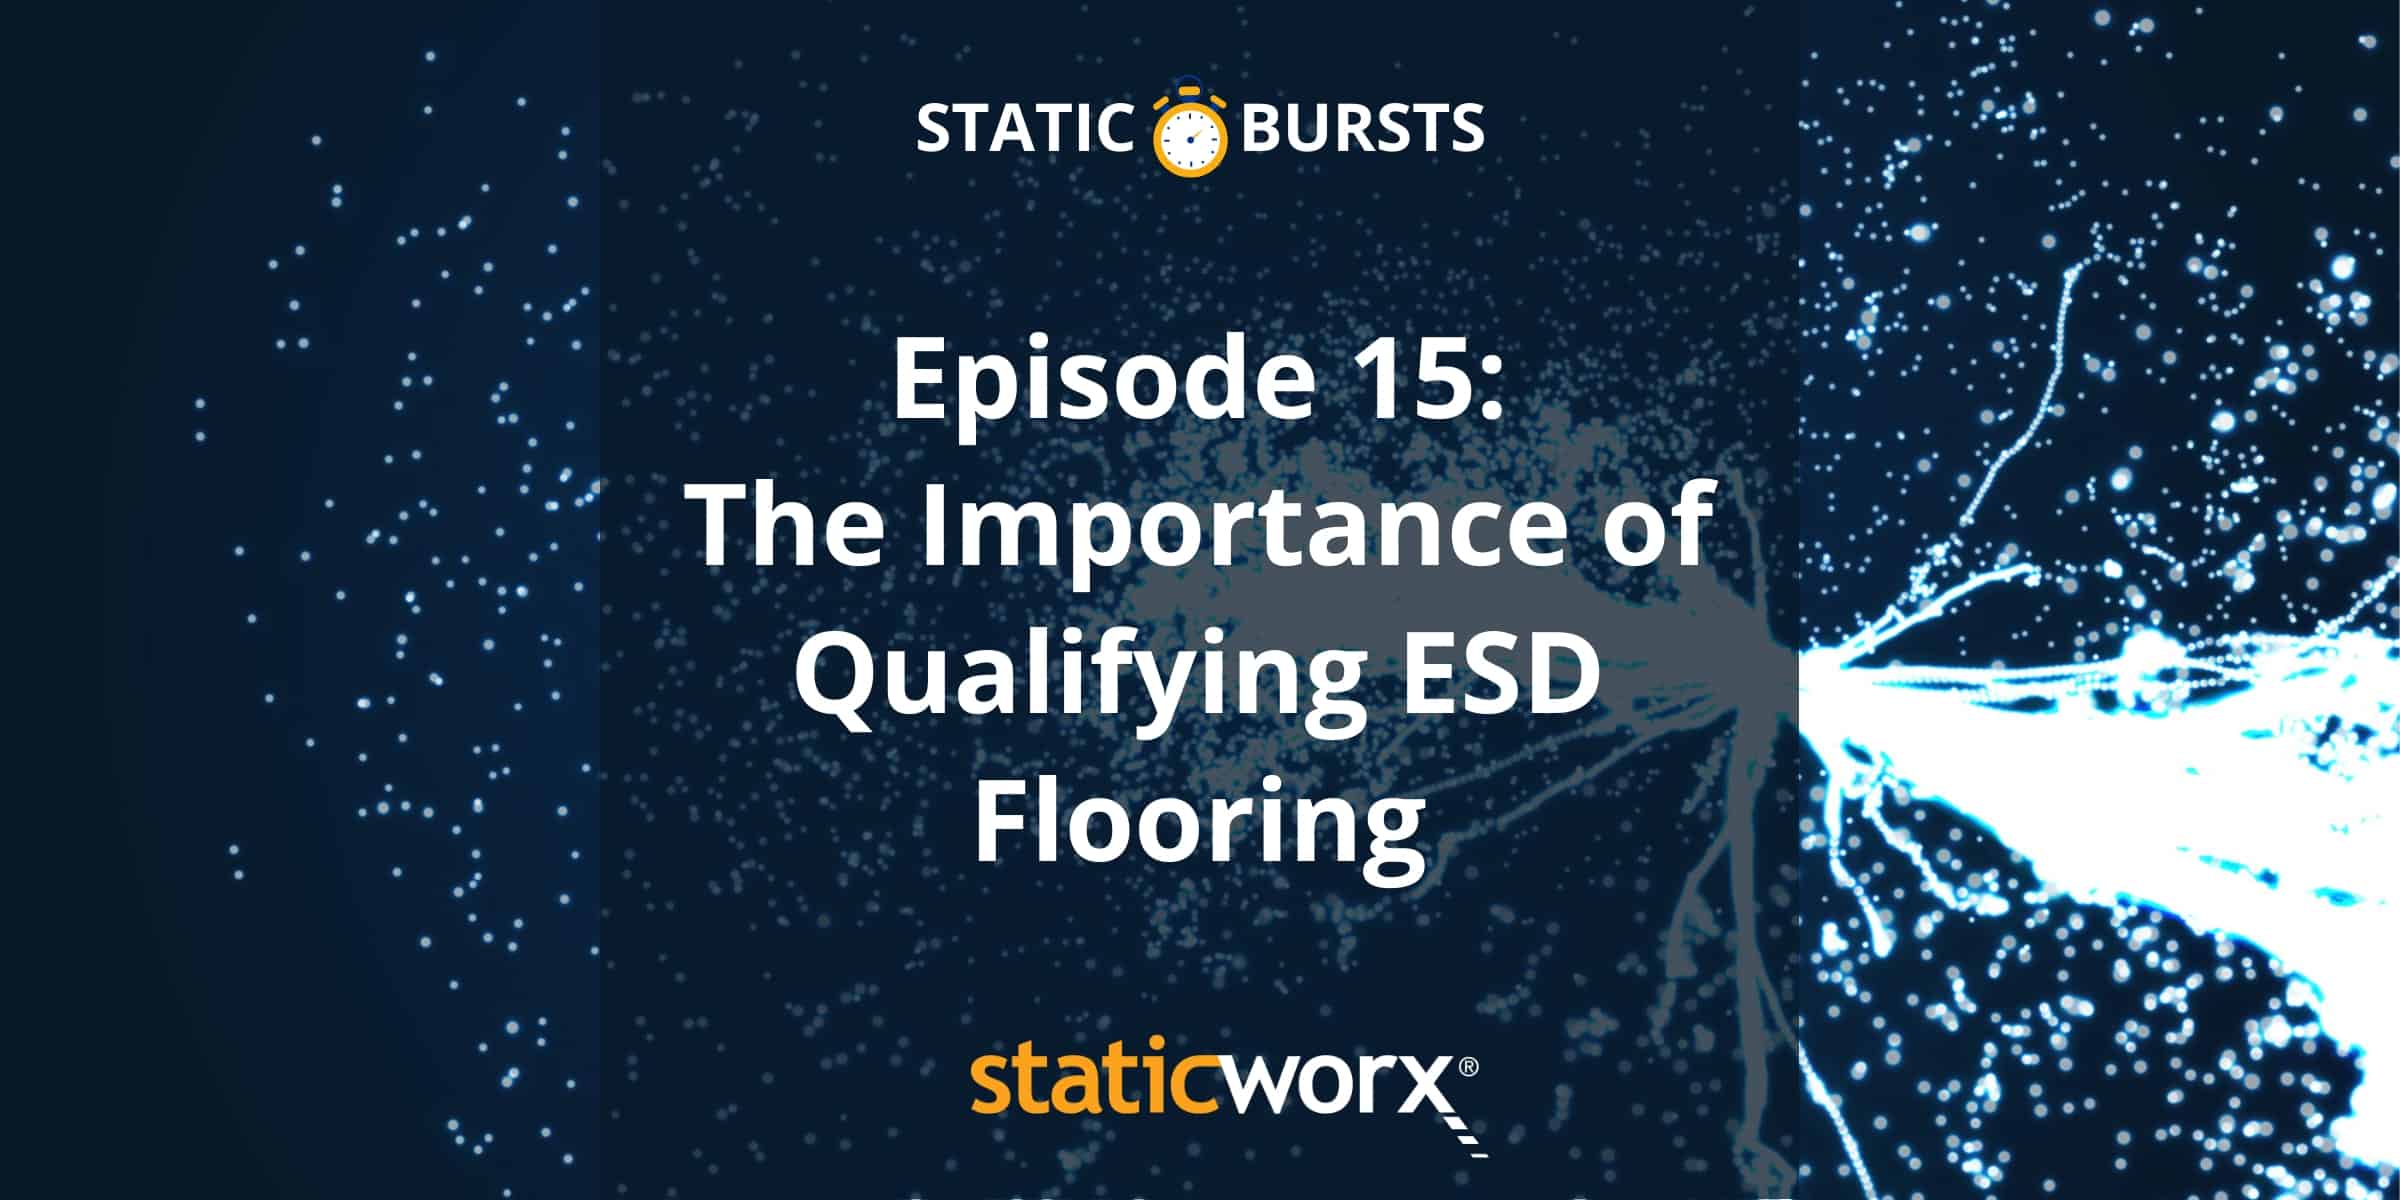 Against a dark blue background, the podcast title 'Static Bursts' appears in white at the top of the image, with an orange and white stopwatch icon between the two words. A lightning spark appears at the right hand side of the image with a cascade of sparks radiating out across the rest of the image. The podcast title Episode 15: The Importance of Qualifying ESD Flooring are overlaid in white and a dark blue semi-opaque square covering the middle of the image. The company name and logo Staticworx appears in orange (first half) and white (second half) at the bottom.